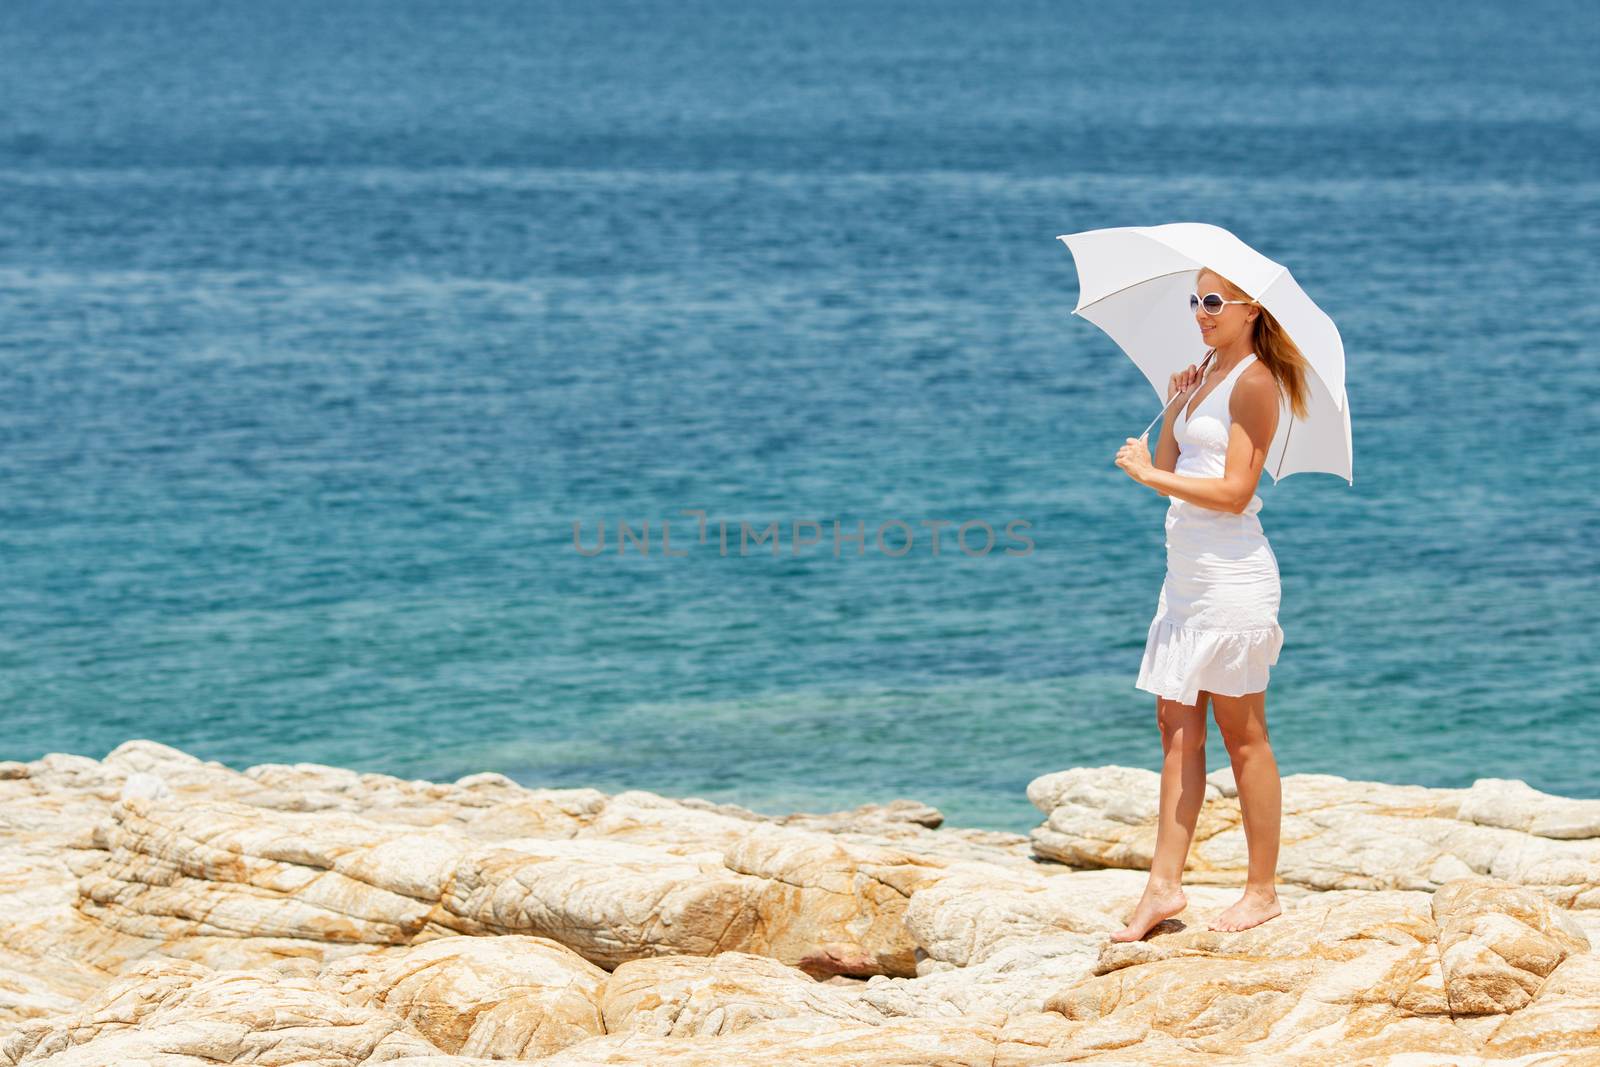 Woman with umbrella Walking on the Beach by MilanMarkovic78